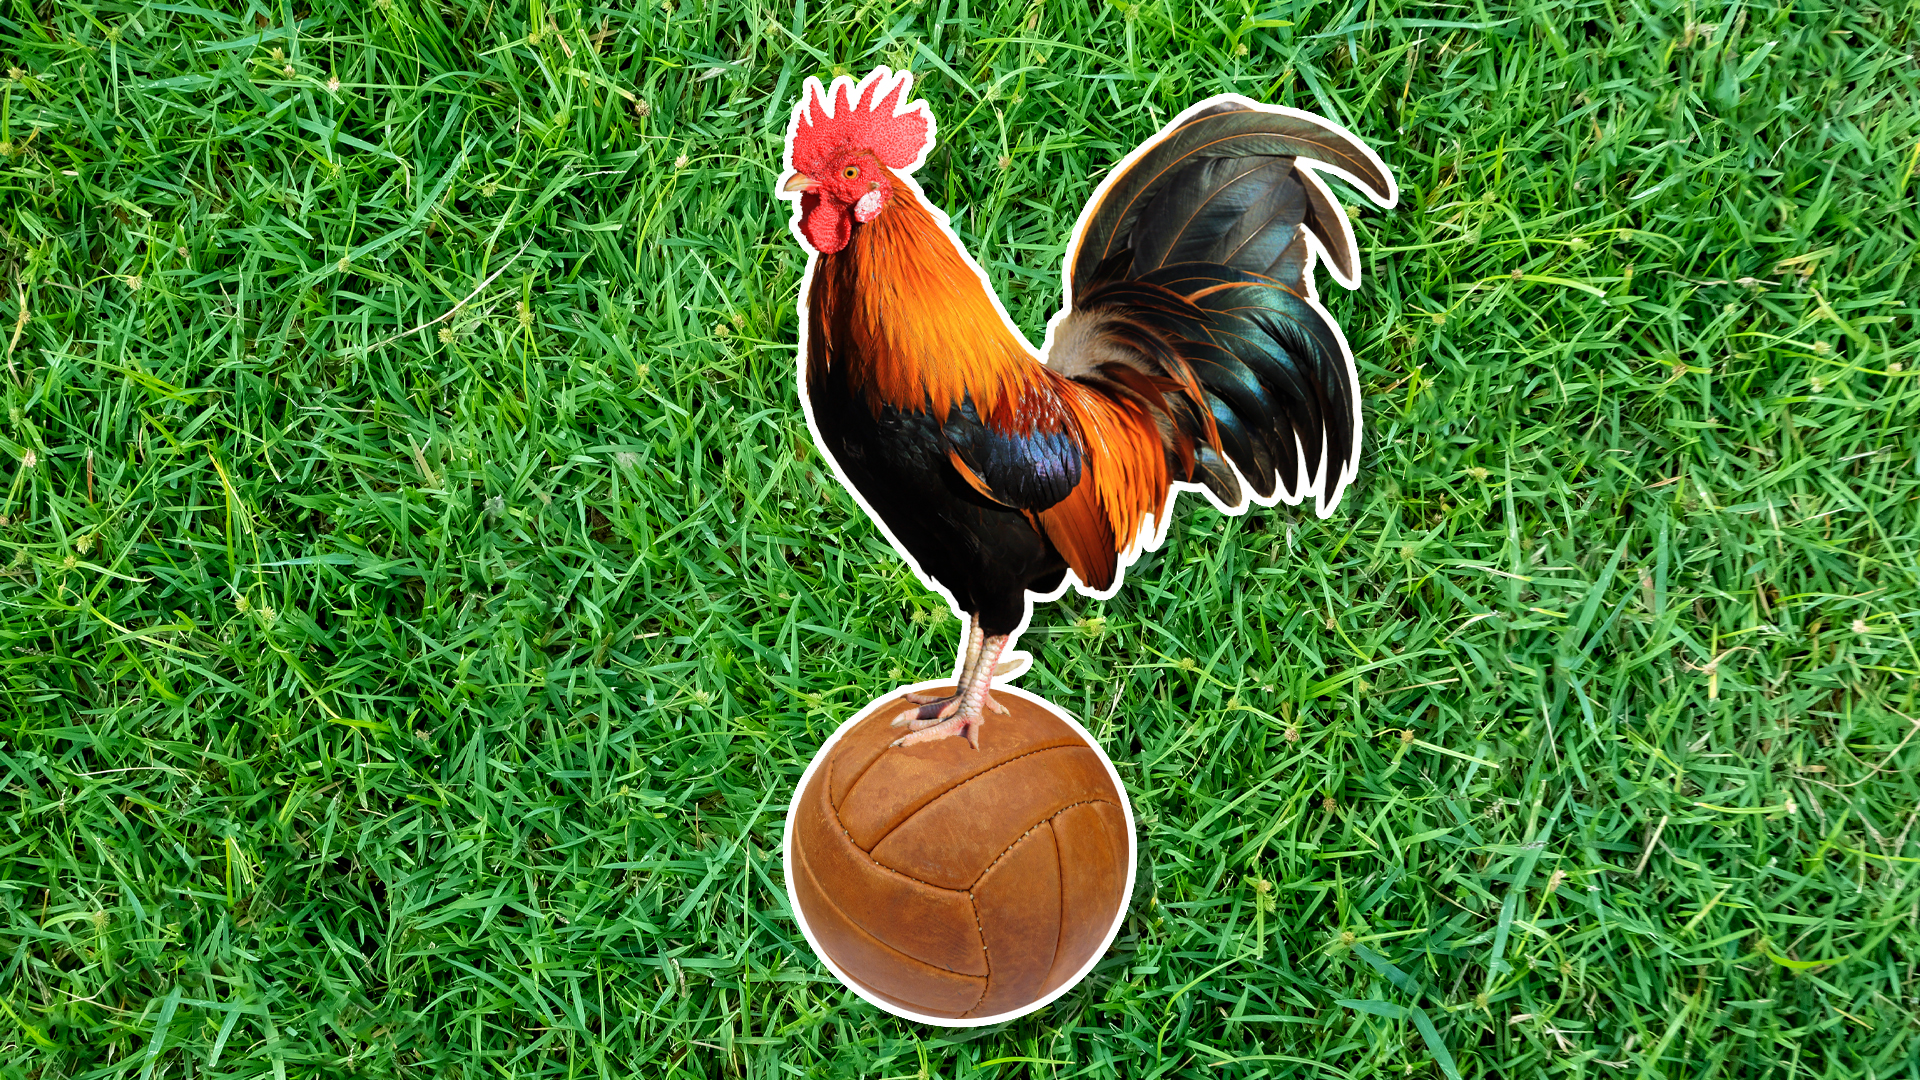 A chicken standing on an old football